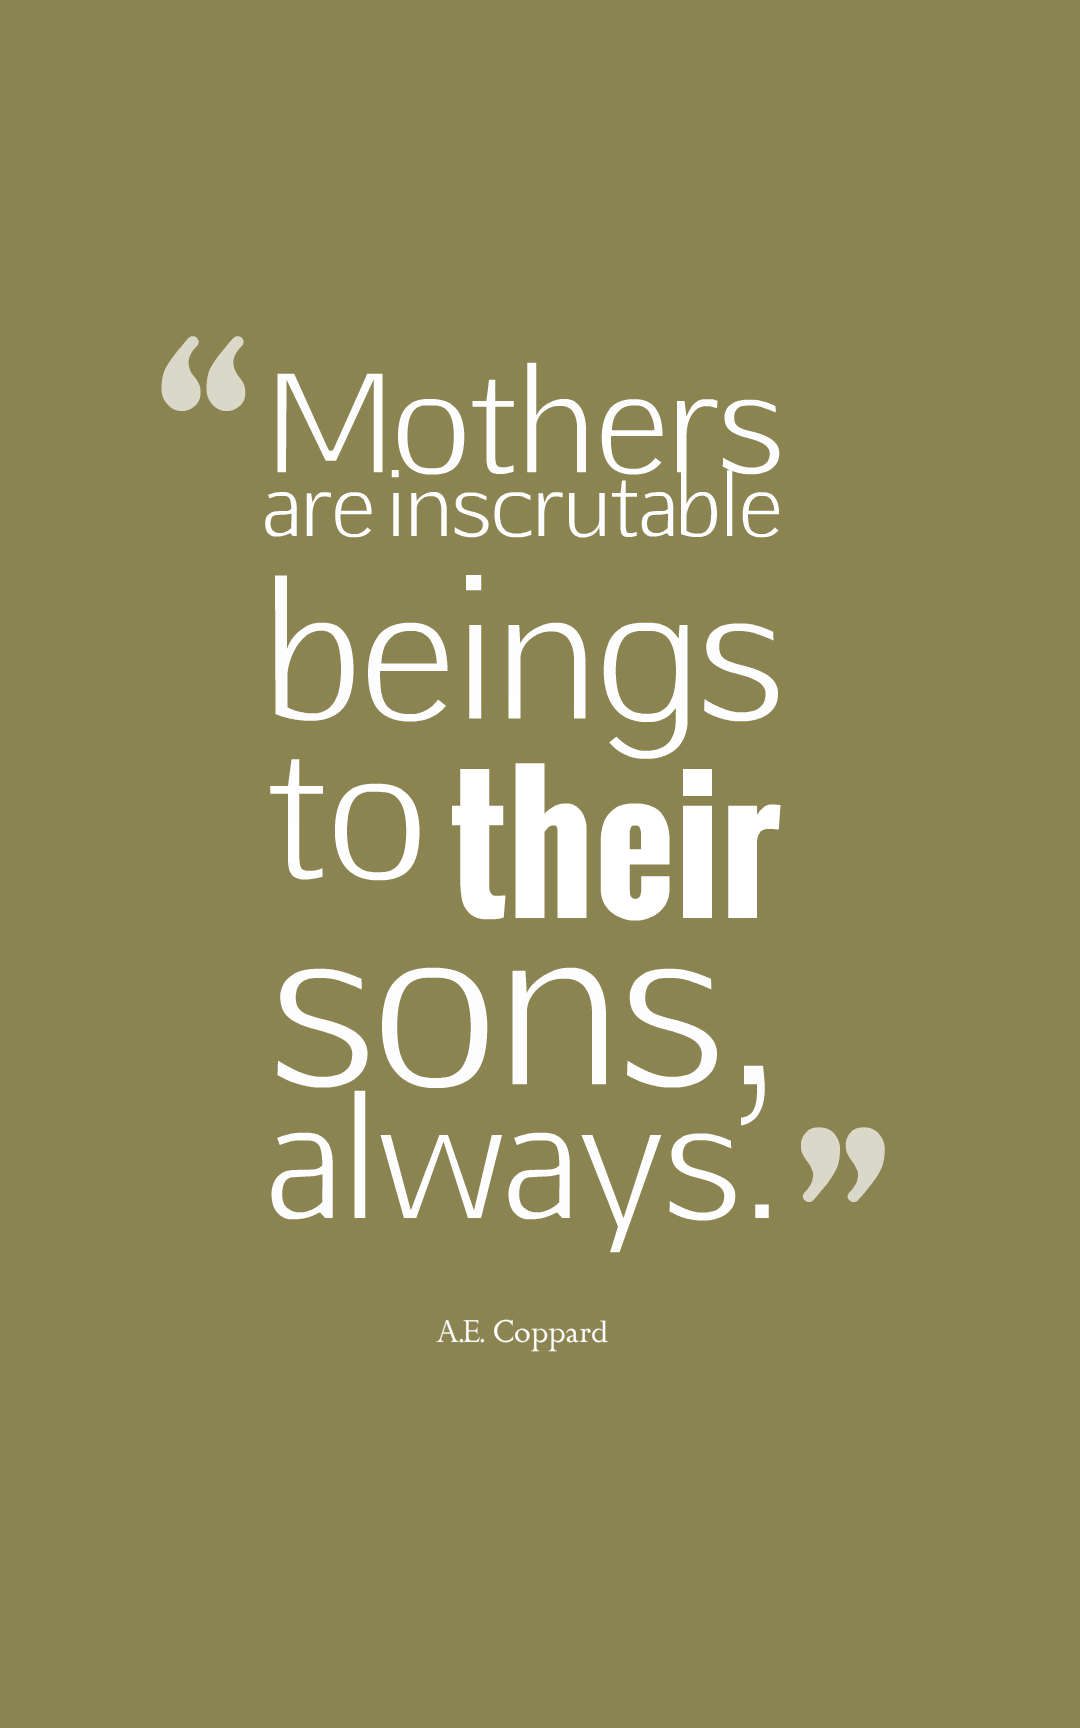 Mothers are inscrutable beings to their sons, always.